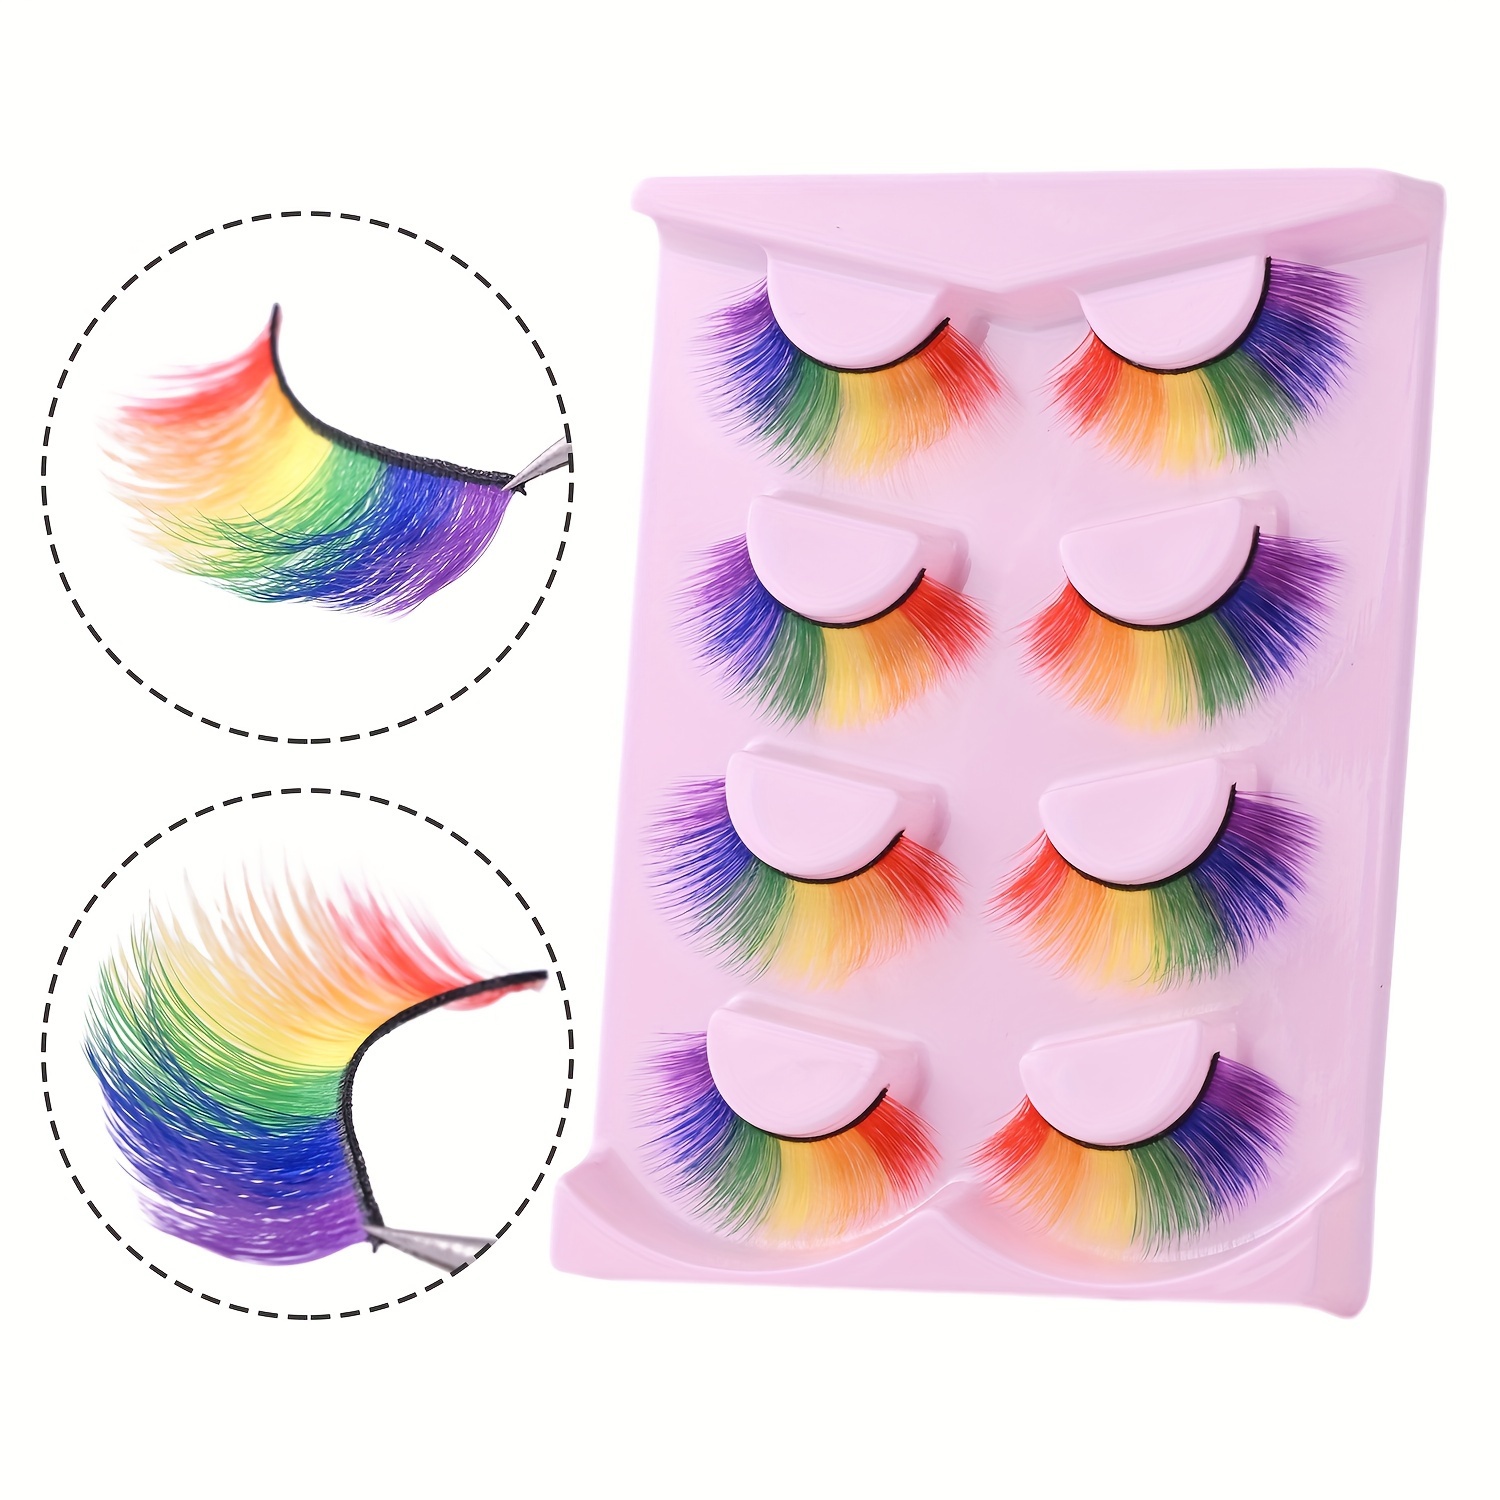 

4 Pairs Mixed Colorful False Eyelashes, 10-17mm Rainbow Full Strip Black Stems 3d Curled Fluffy Thick Lashes For Anime Cosplay & Doll Makeup Music Festival